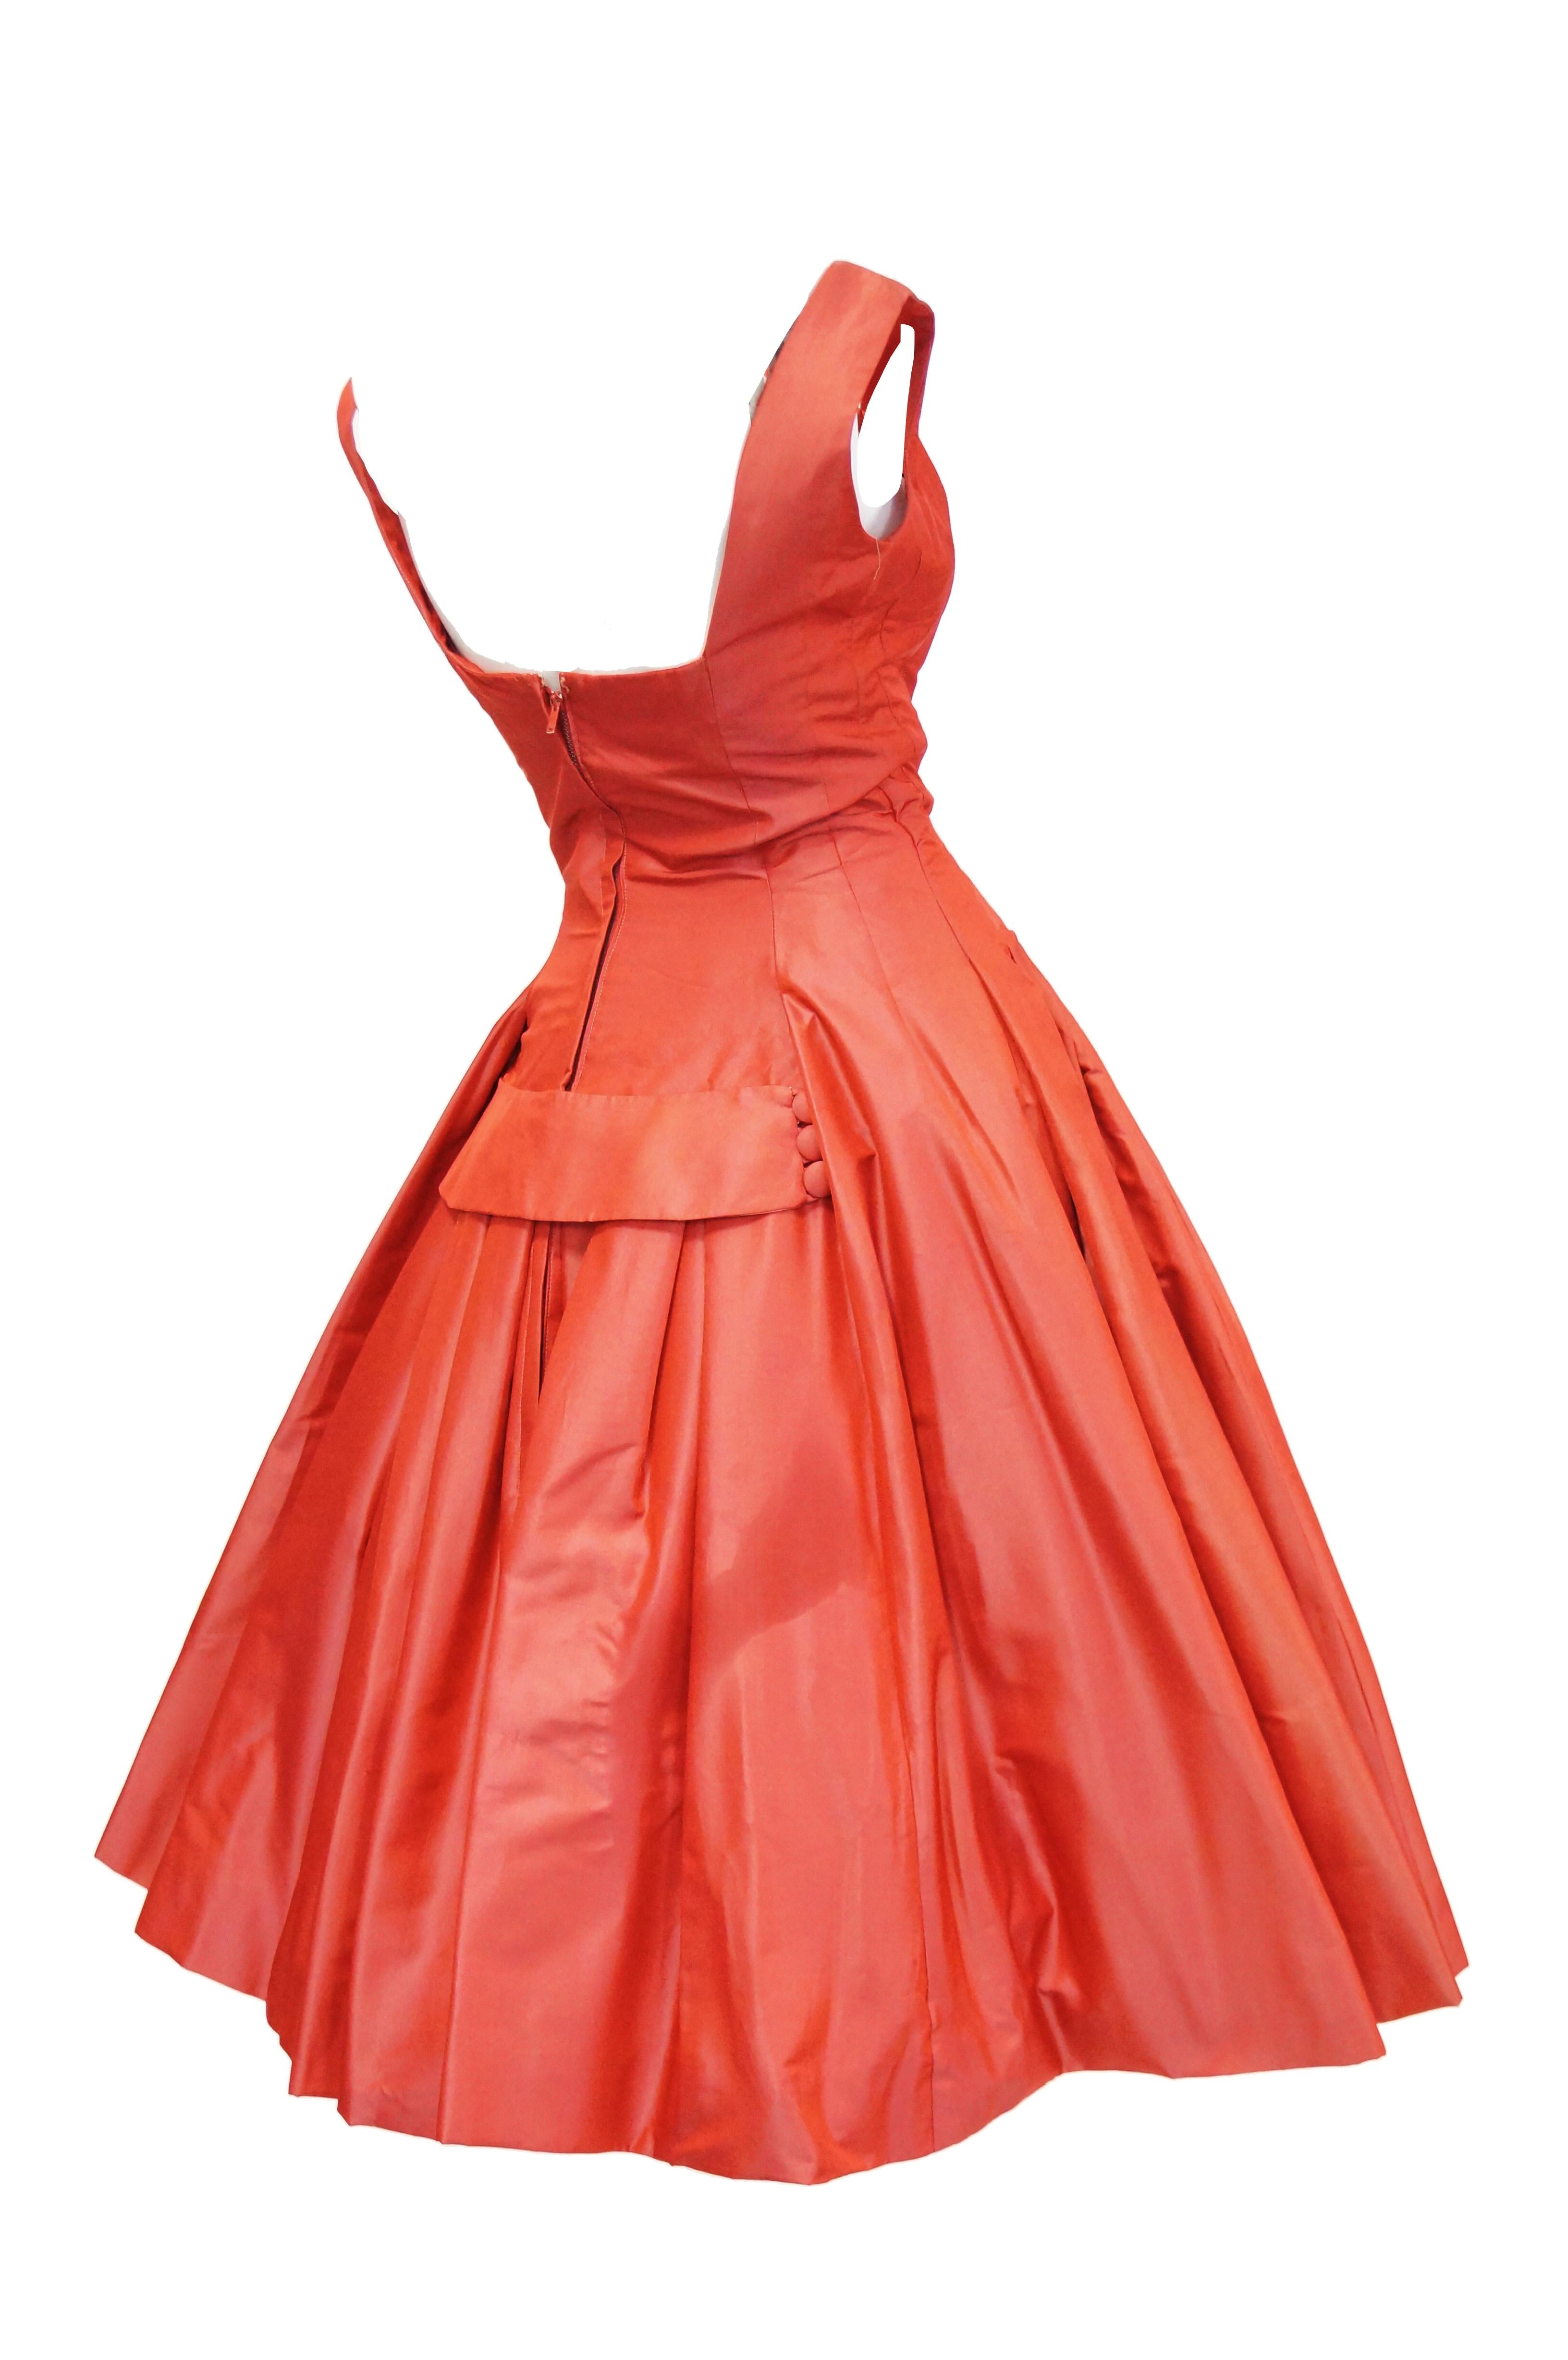 Women's 1950s Suzy Perette Red Charmeuse Satin New Look Evening Dress with Bow Detail